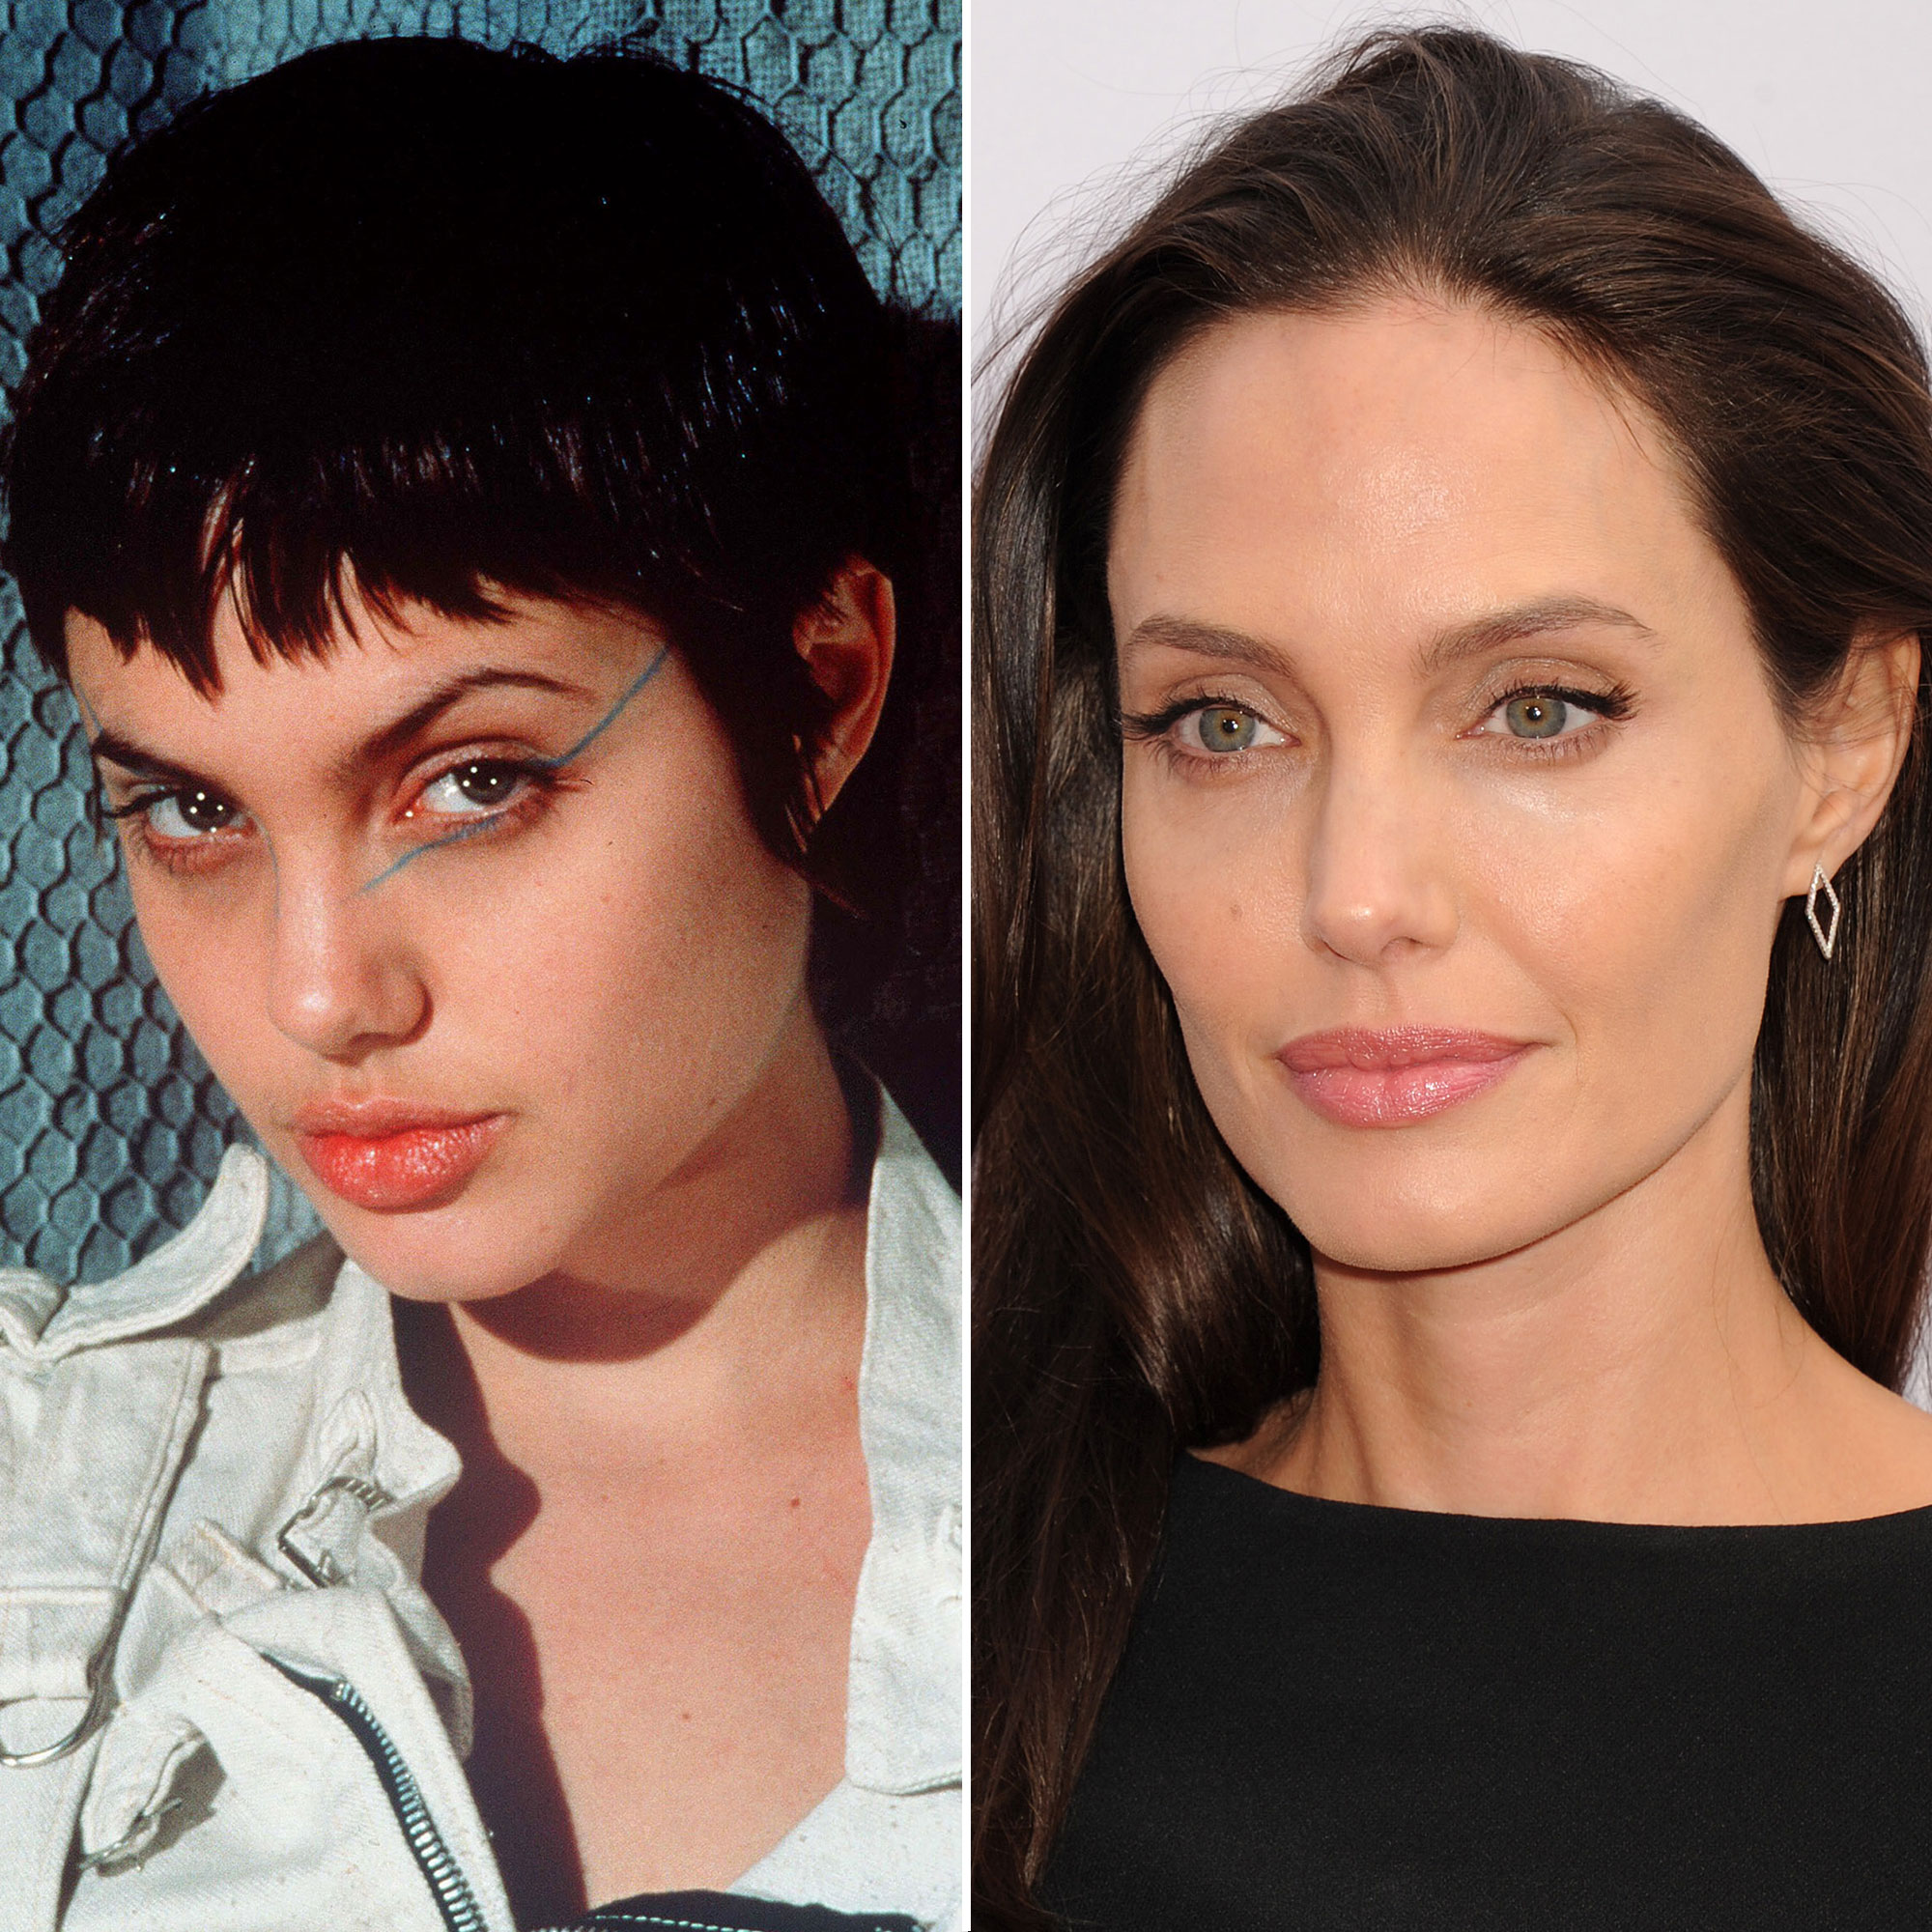 On Angelina Jolie's birthday, a look back at some of her best style moments